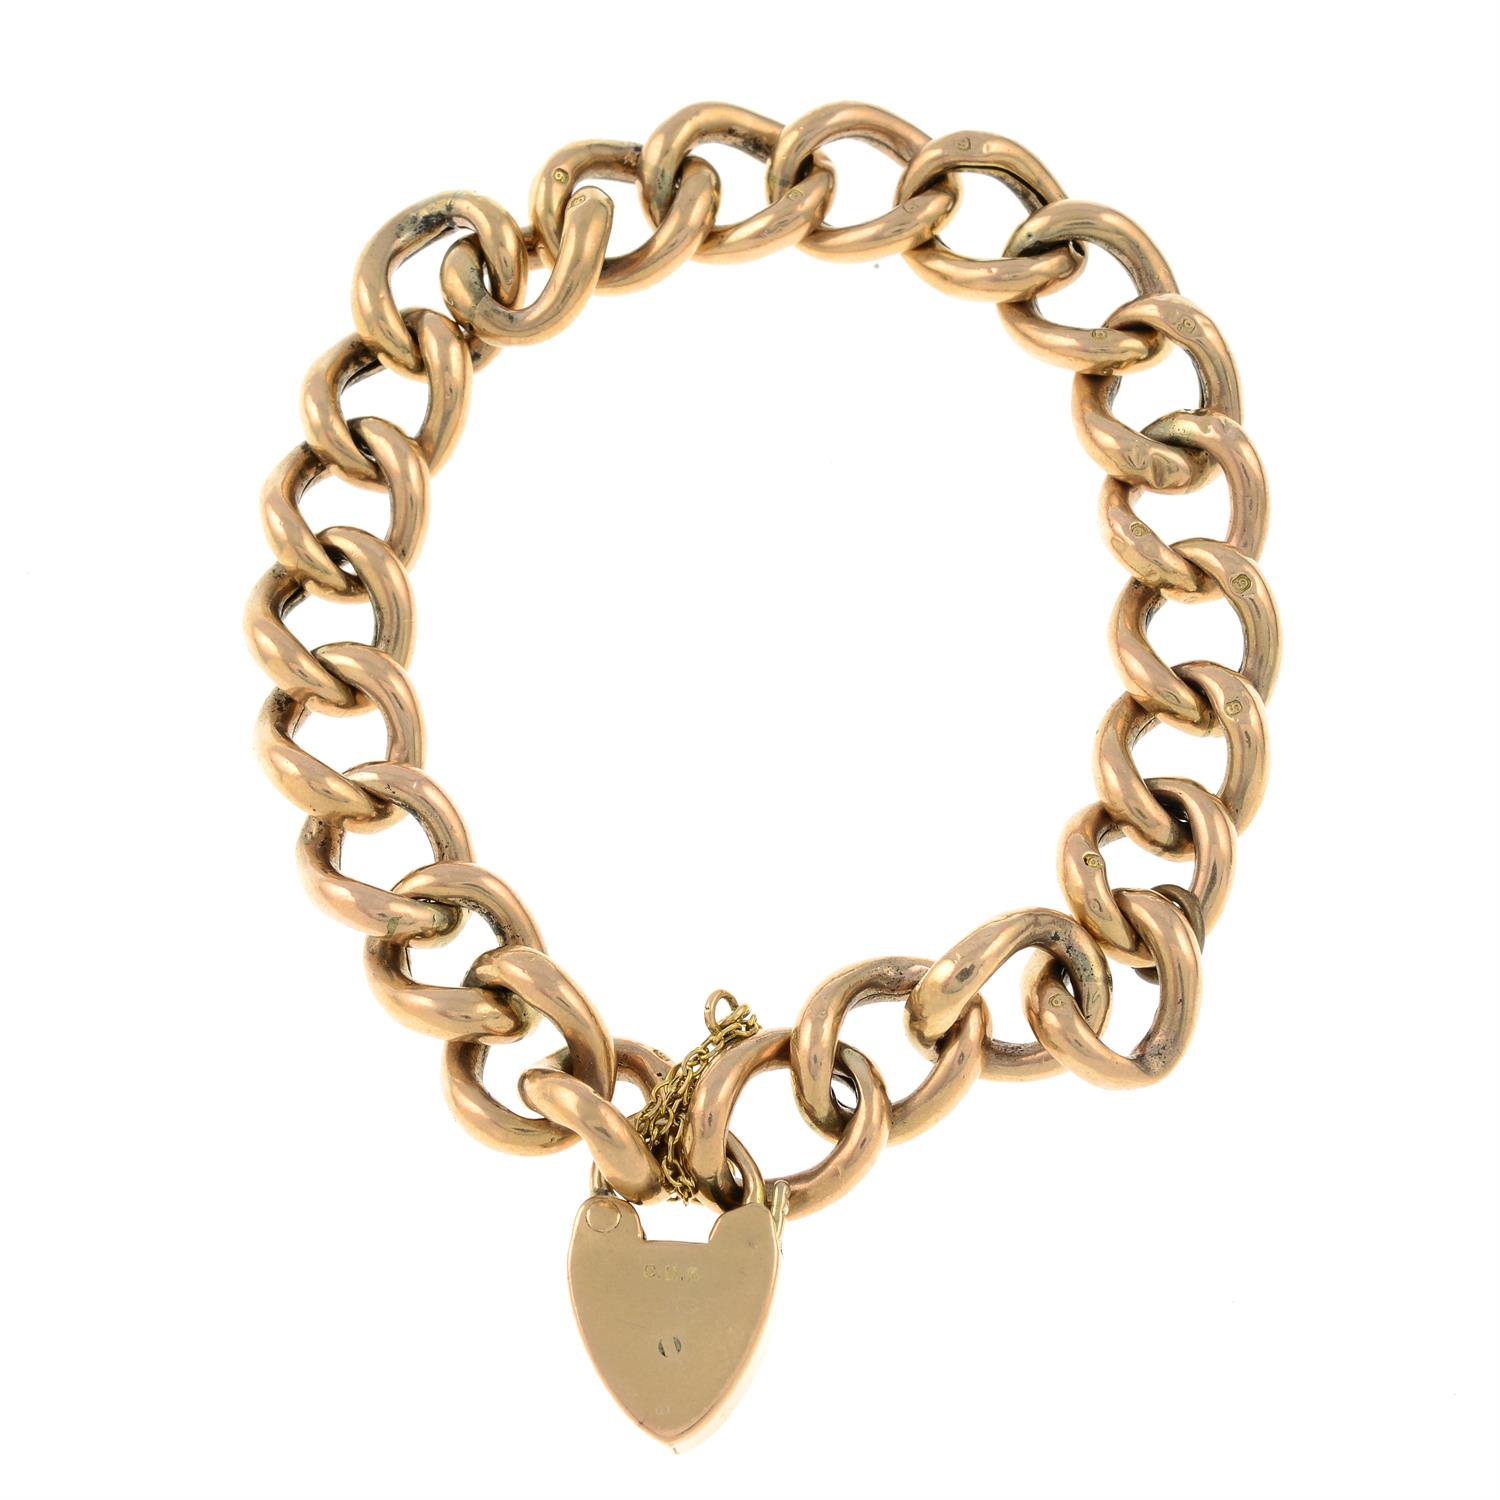 A 9ct gold bracelet with heart-lock clasp. - Image 2 of 2